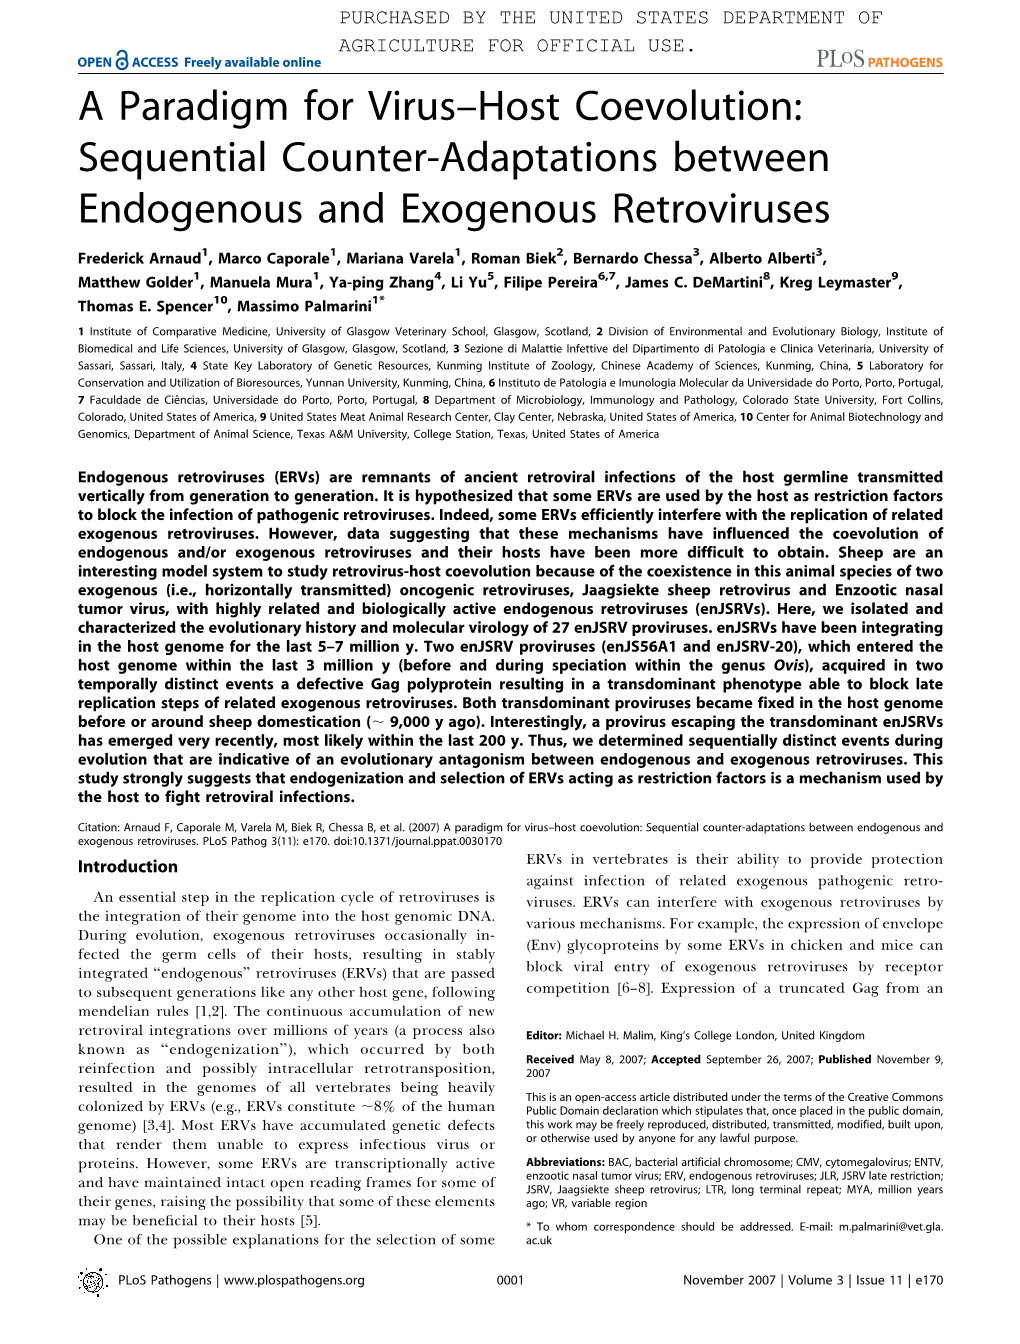 Sequential Counter-Adaptations Between Endogenous and Exogenous Retroviruses